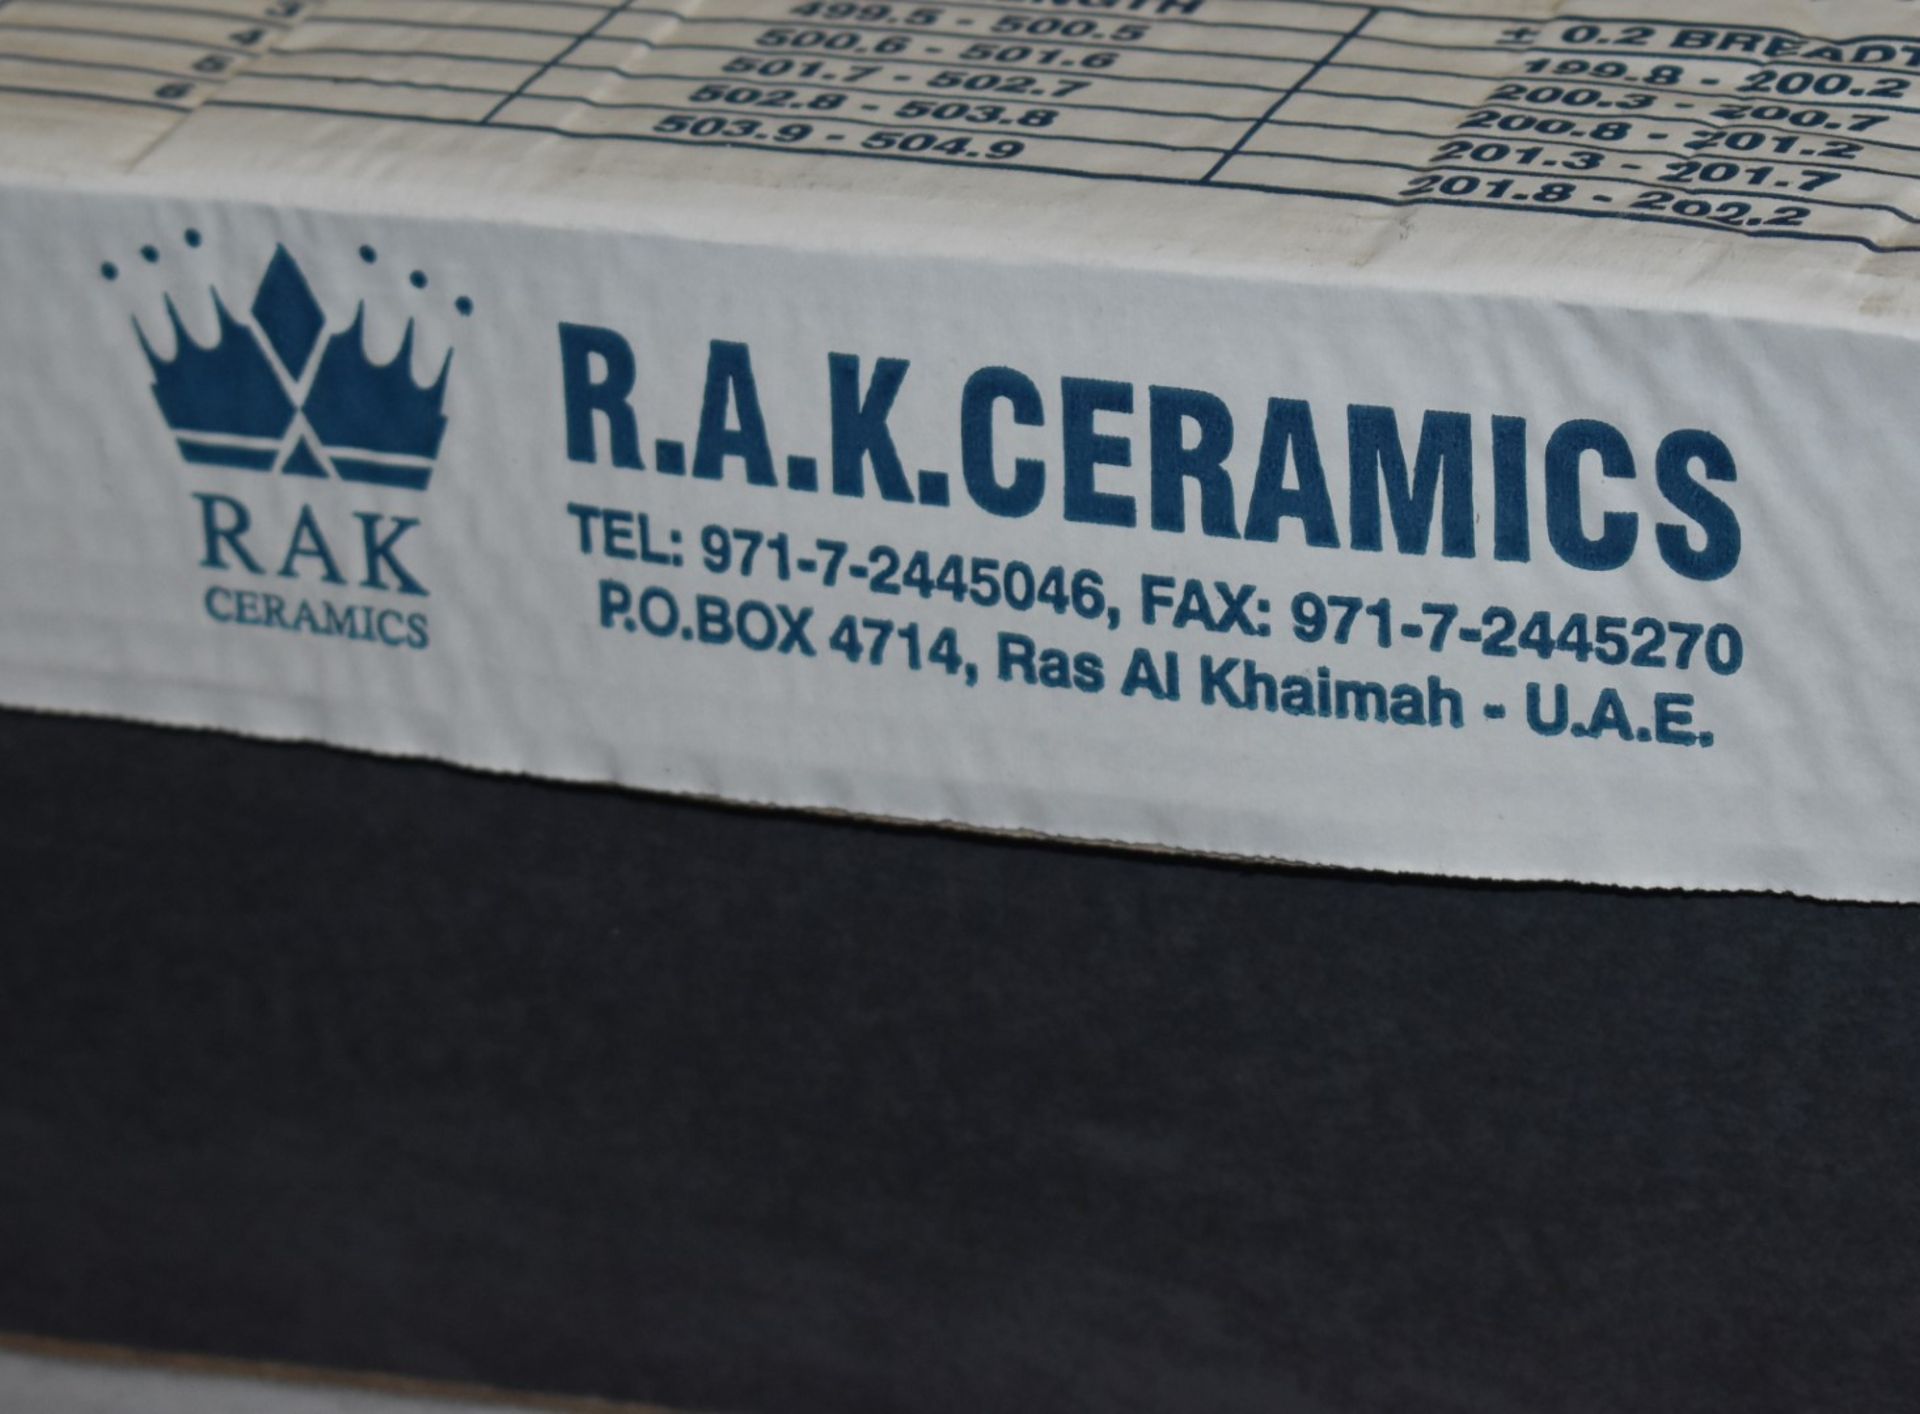 6 x Boxes of RAK Porcelain Floor or Wall Tiles - Dolomit Black - 20 x 50 cm - A Total of 8.4 m² - Image 9 of 9